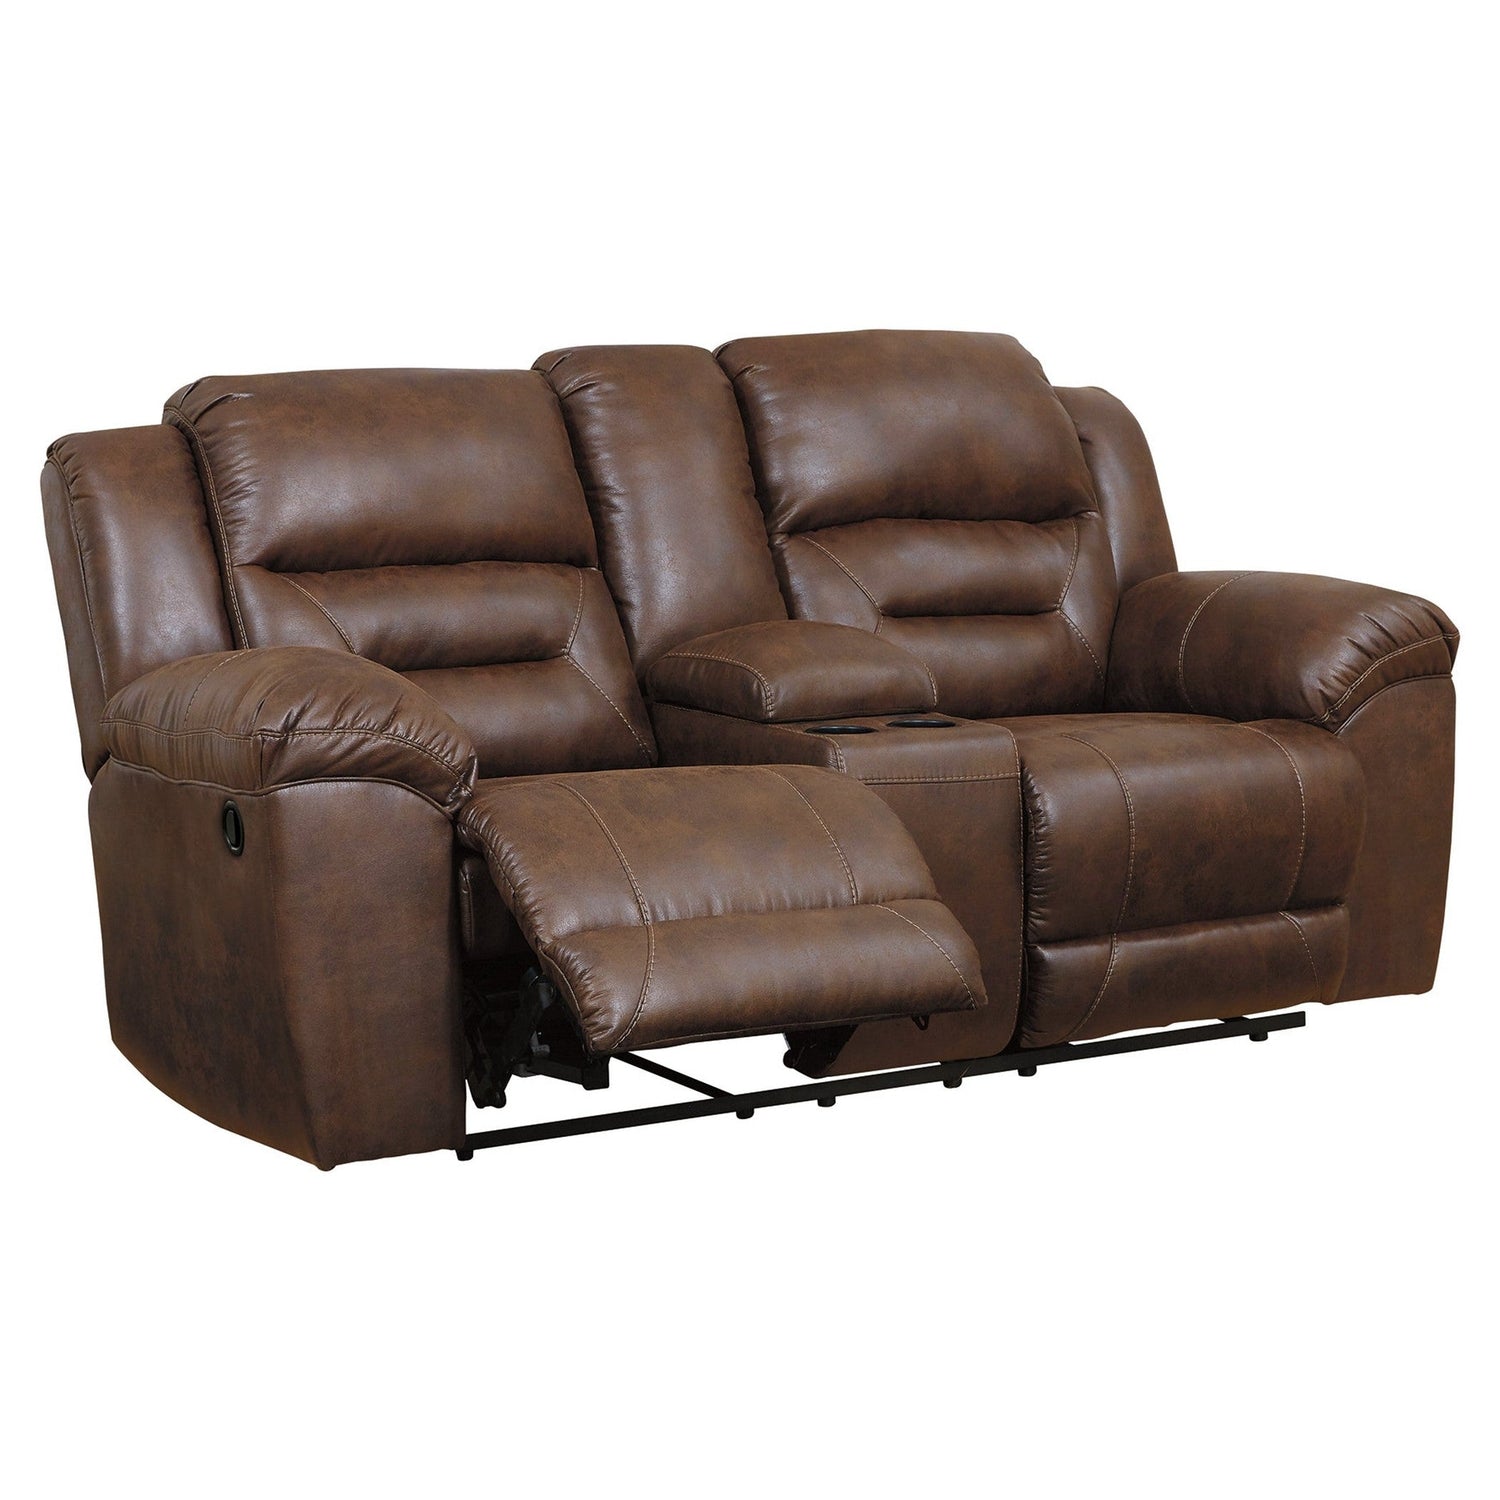 Stoneland Reclining Loveseat with Console Ash-3990494